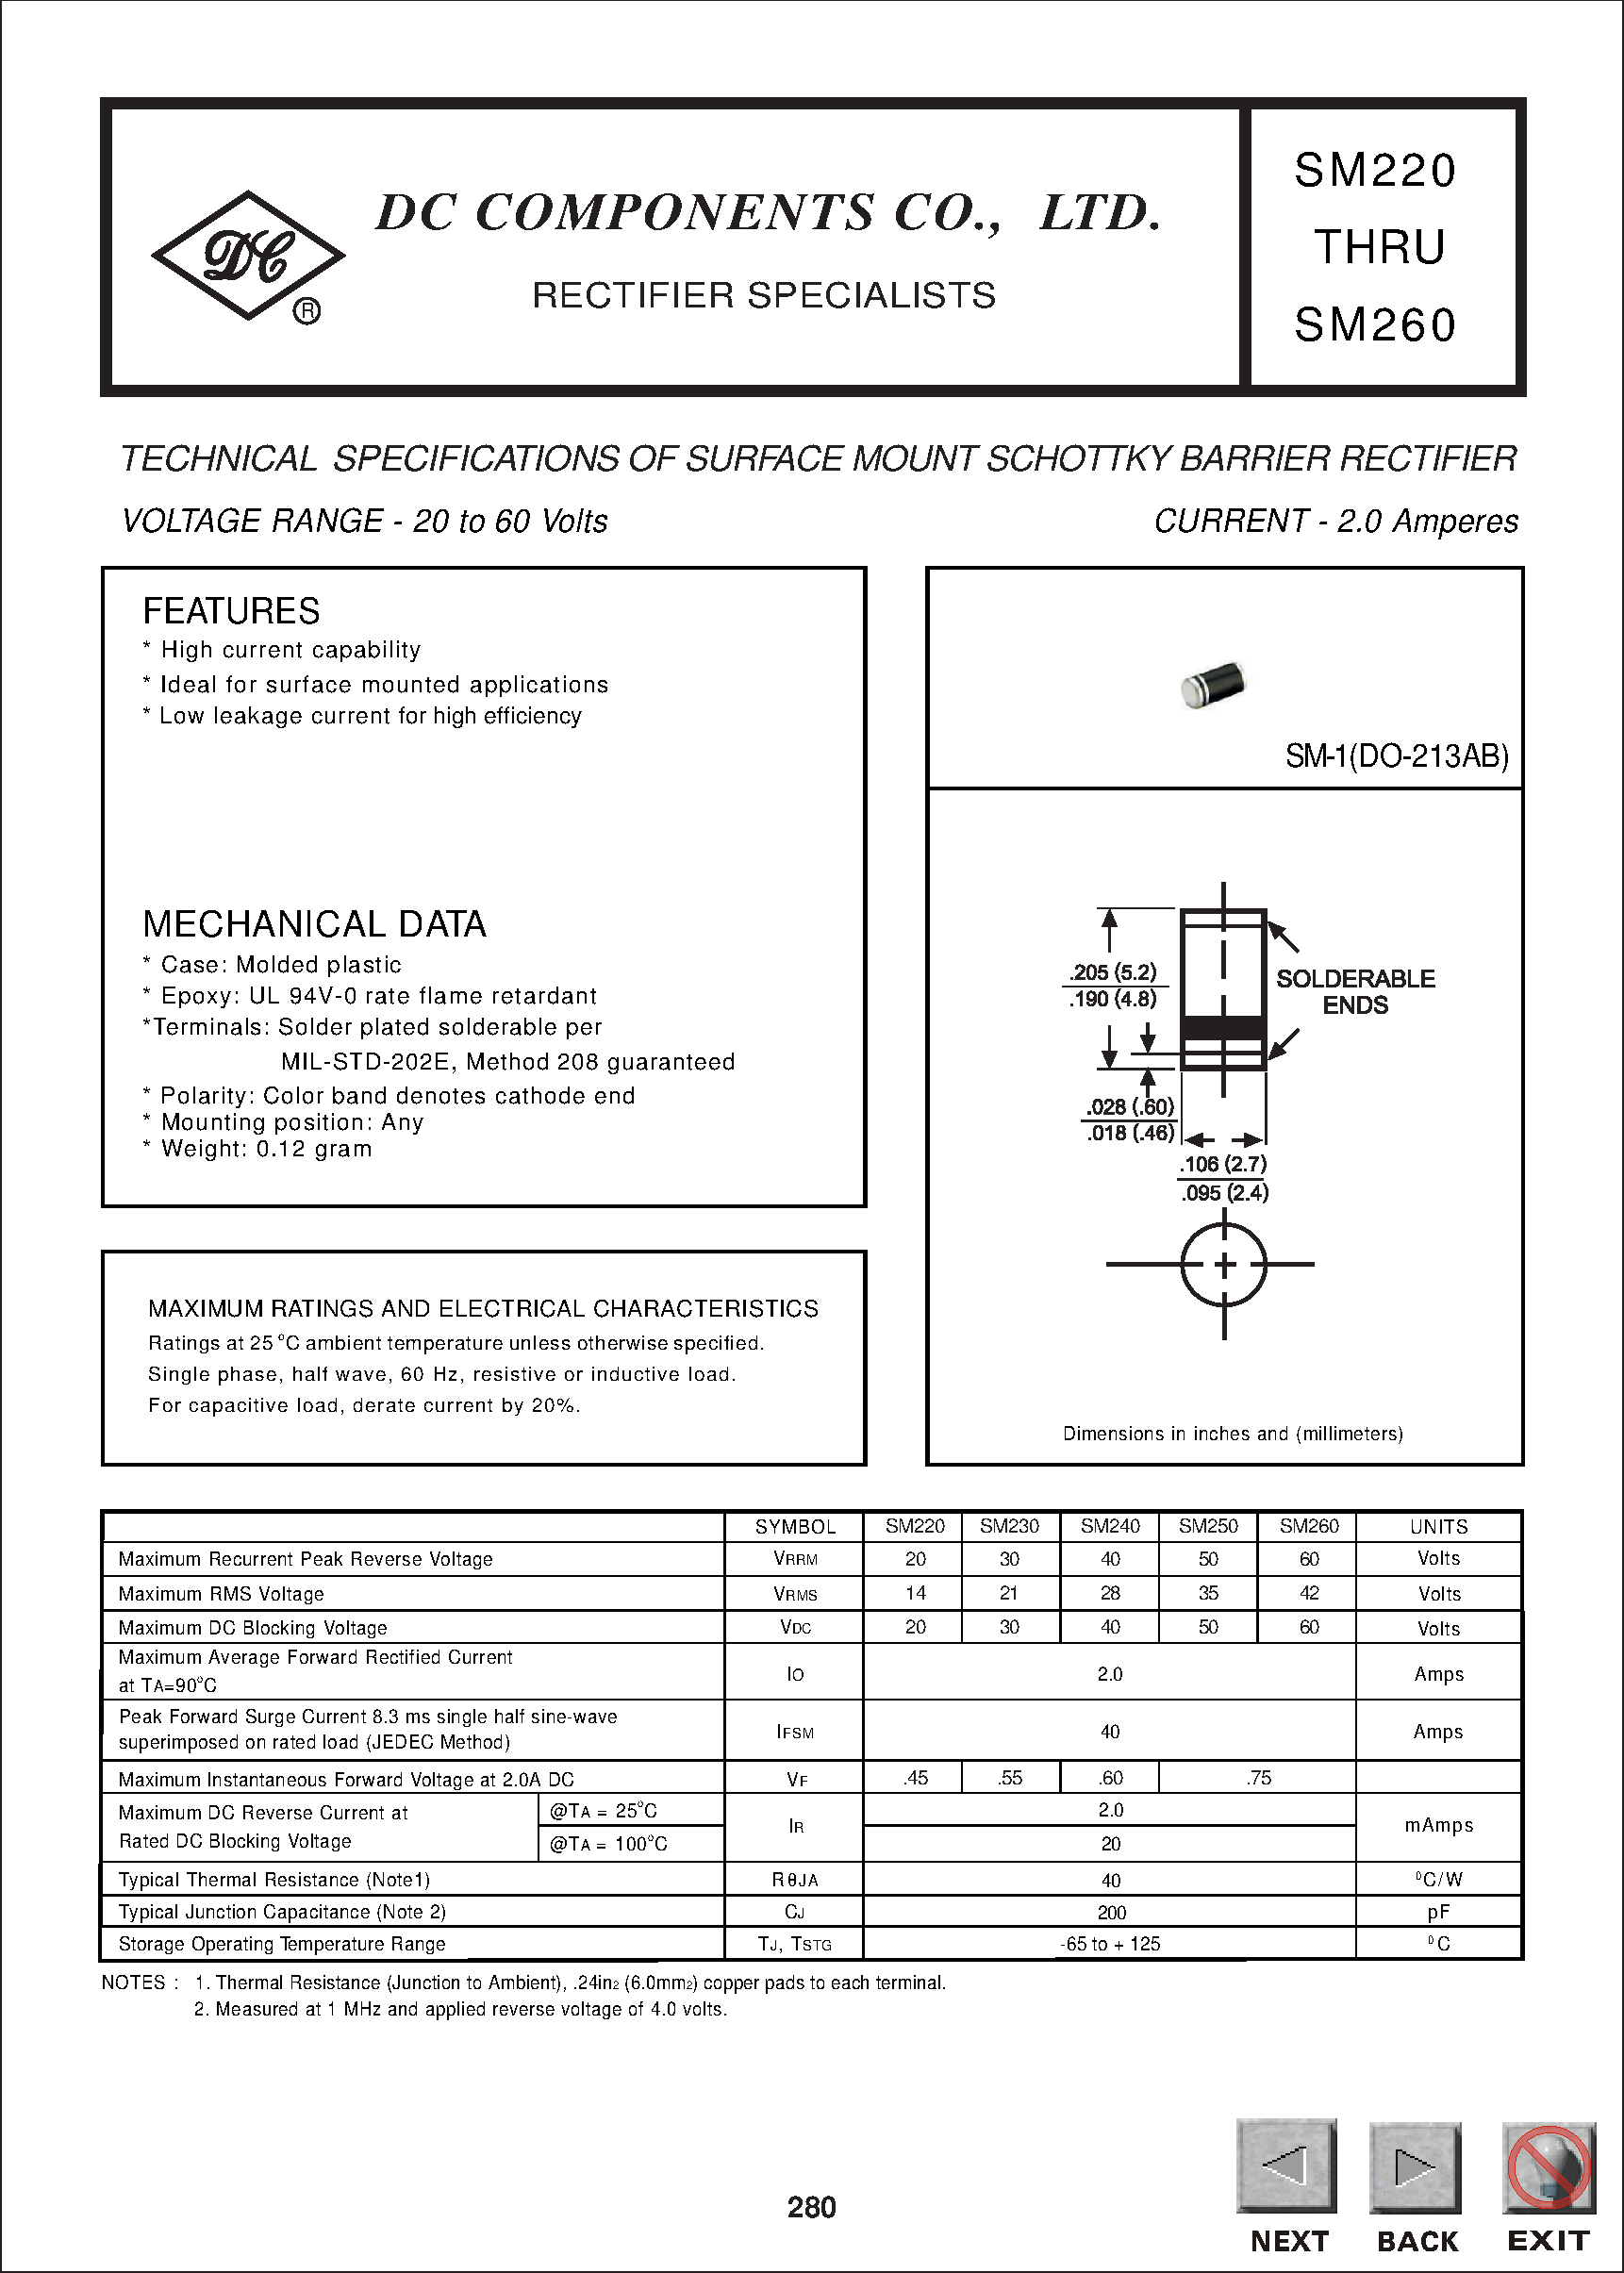 Datasheet SM230 - TECHNICAL SPECIFICATIONS OF SURFACE MOUNT SCHOTTKY BARRIER RECTIFIER page 1